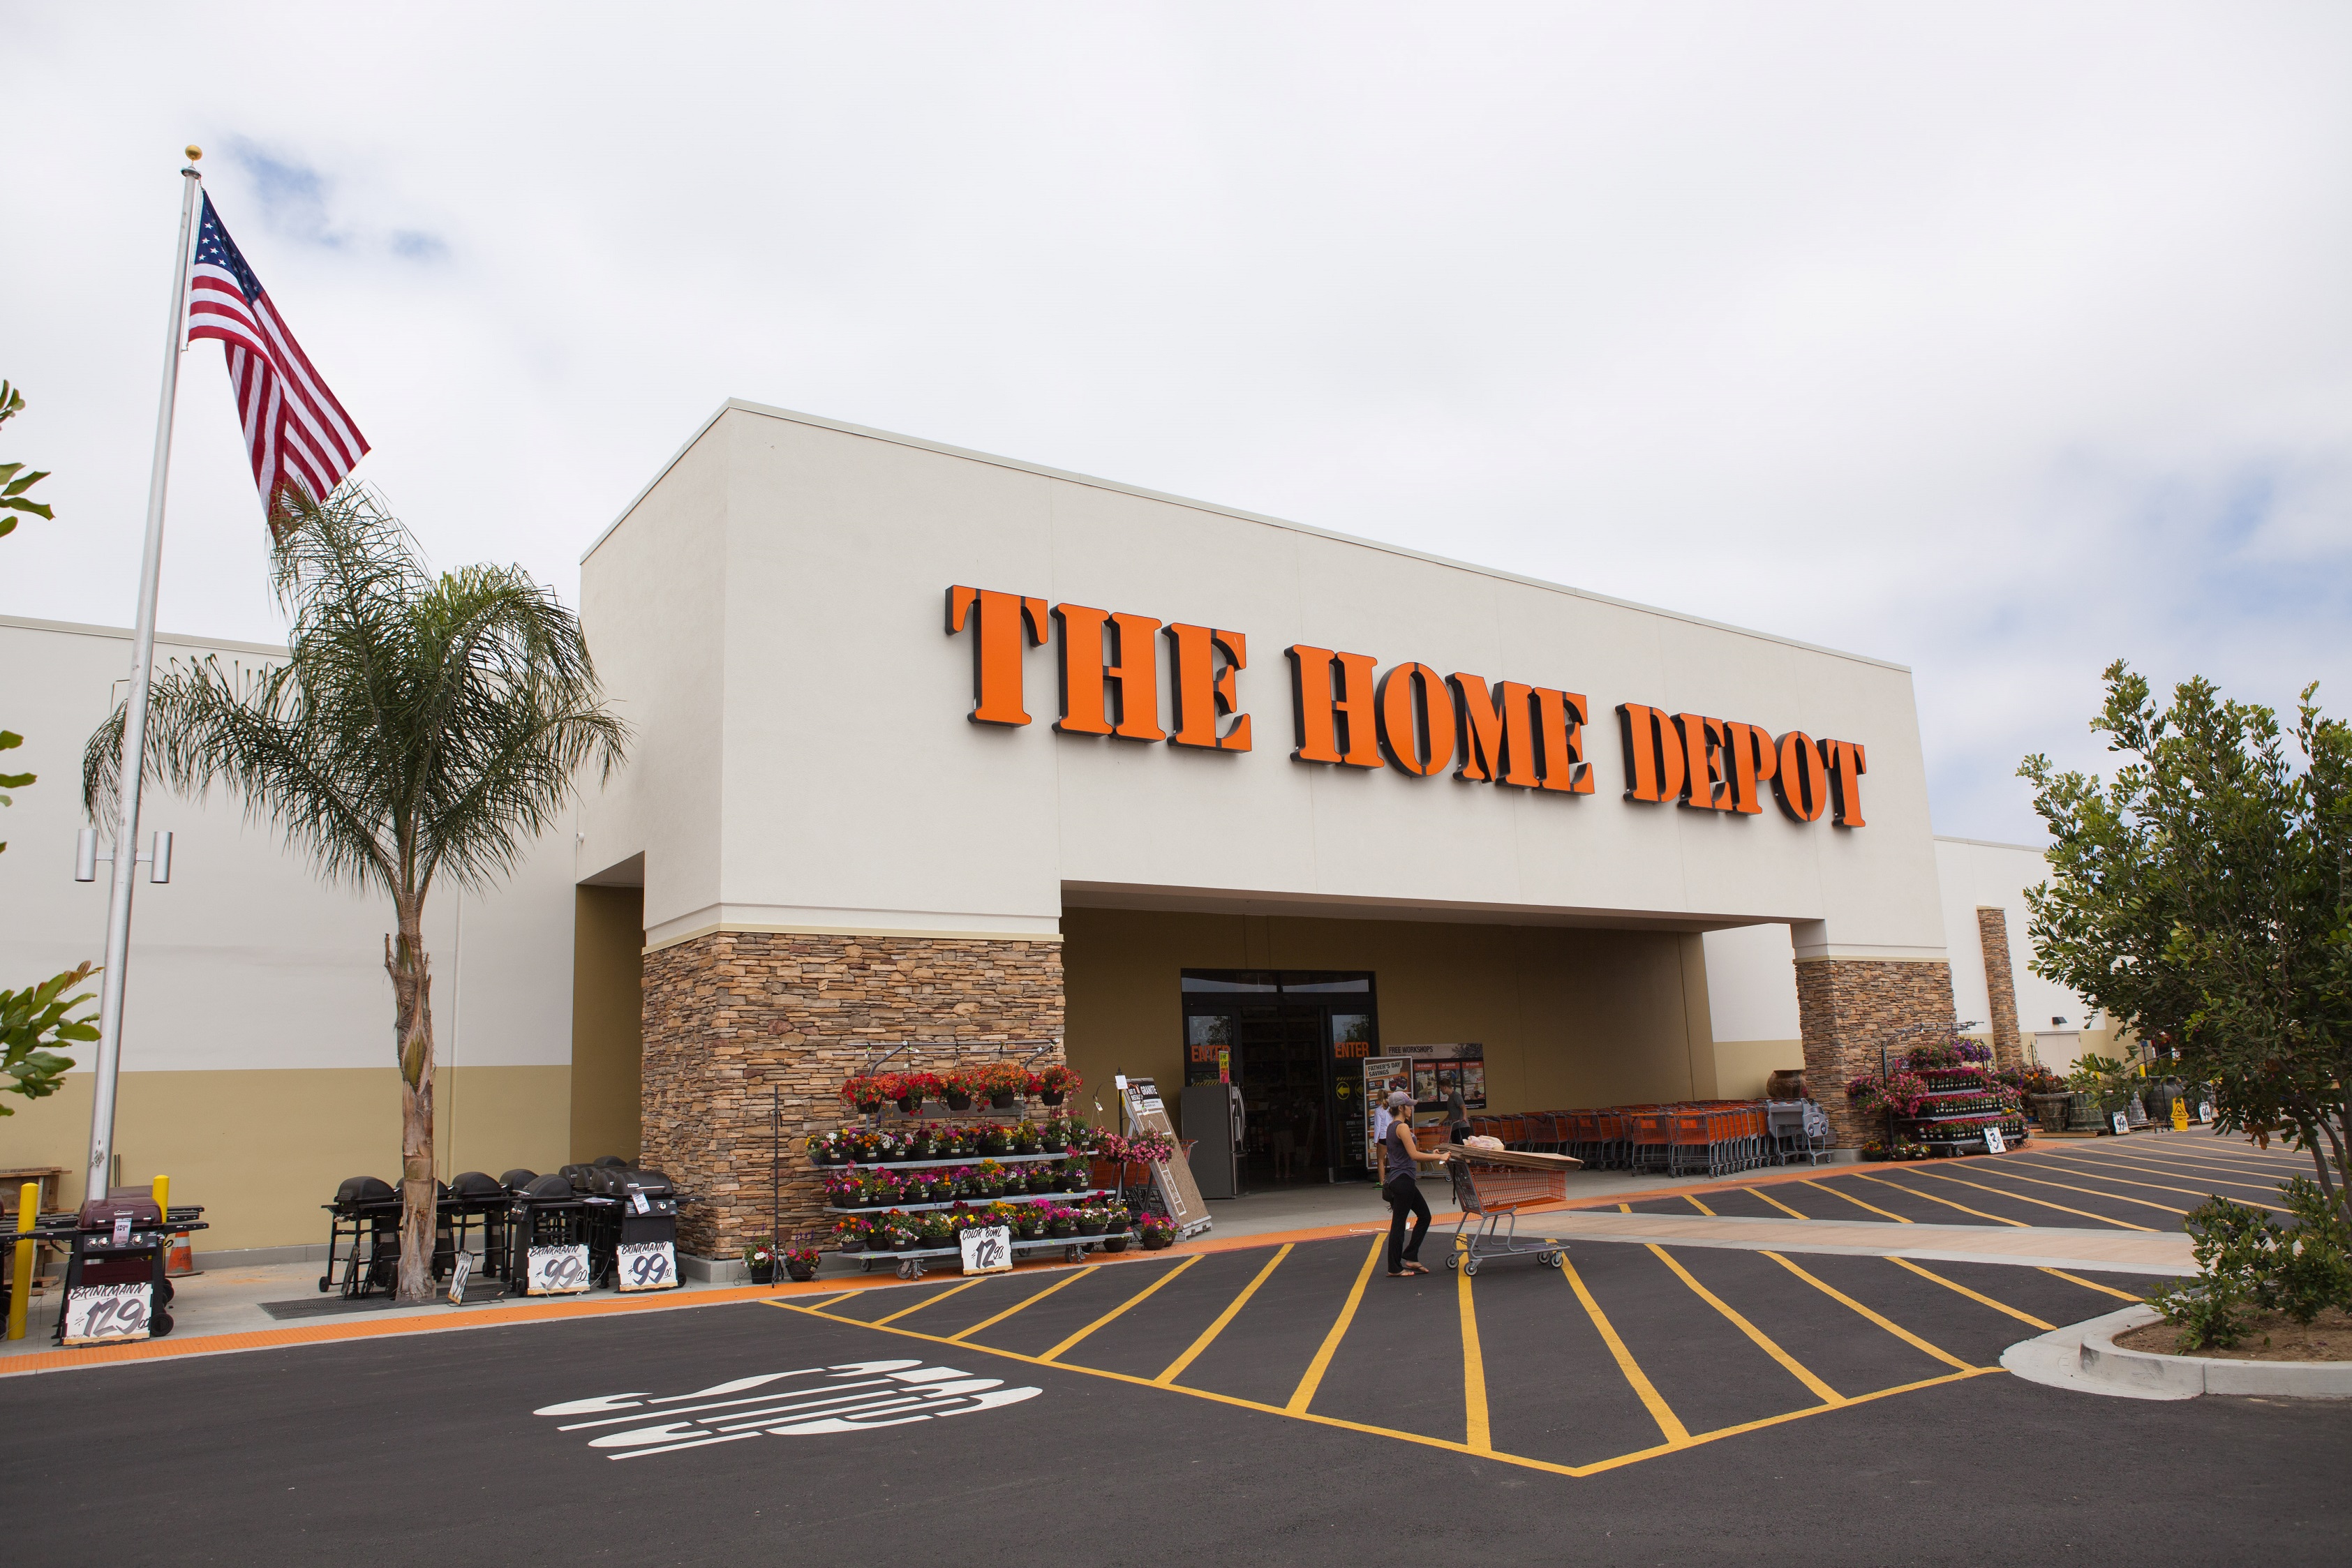 Company_Home Depot_Storefront.jpg The Home Depot